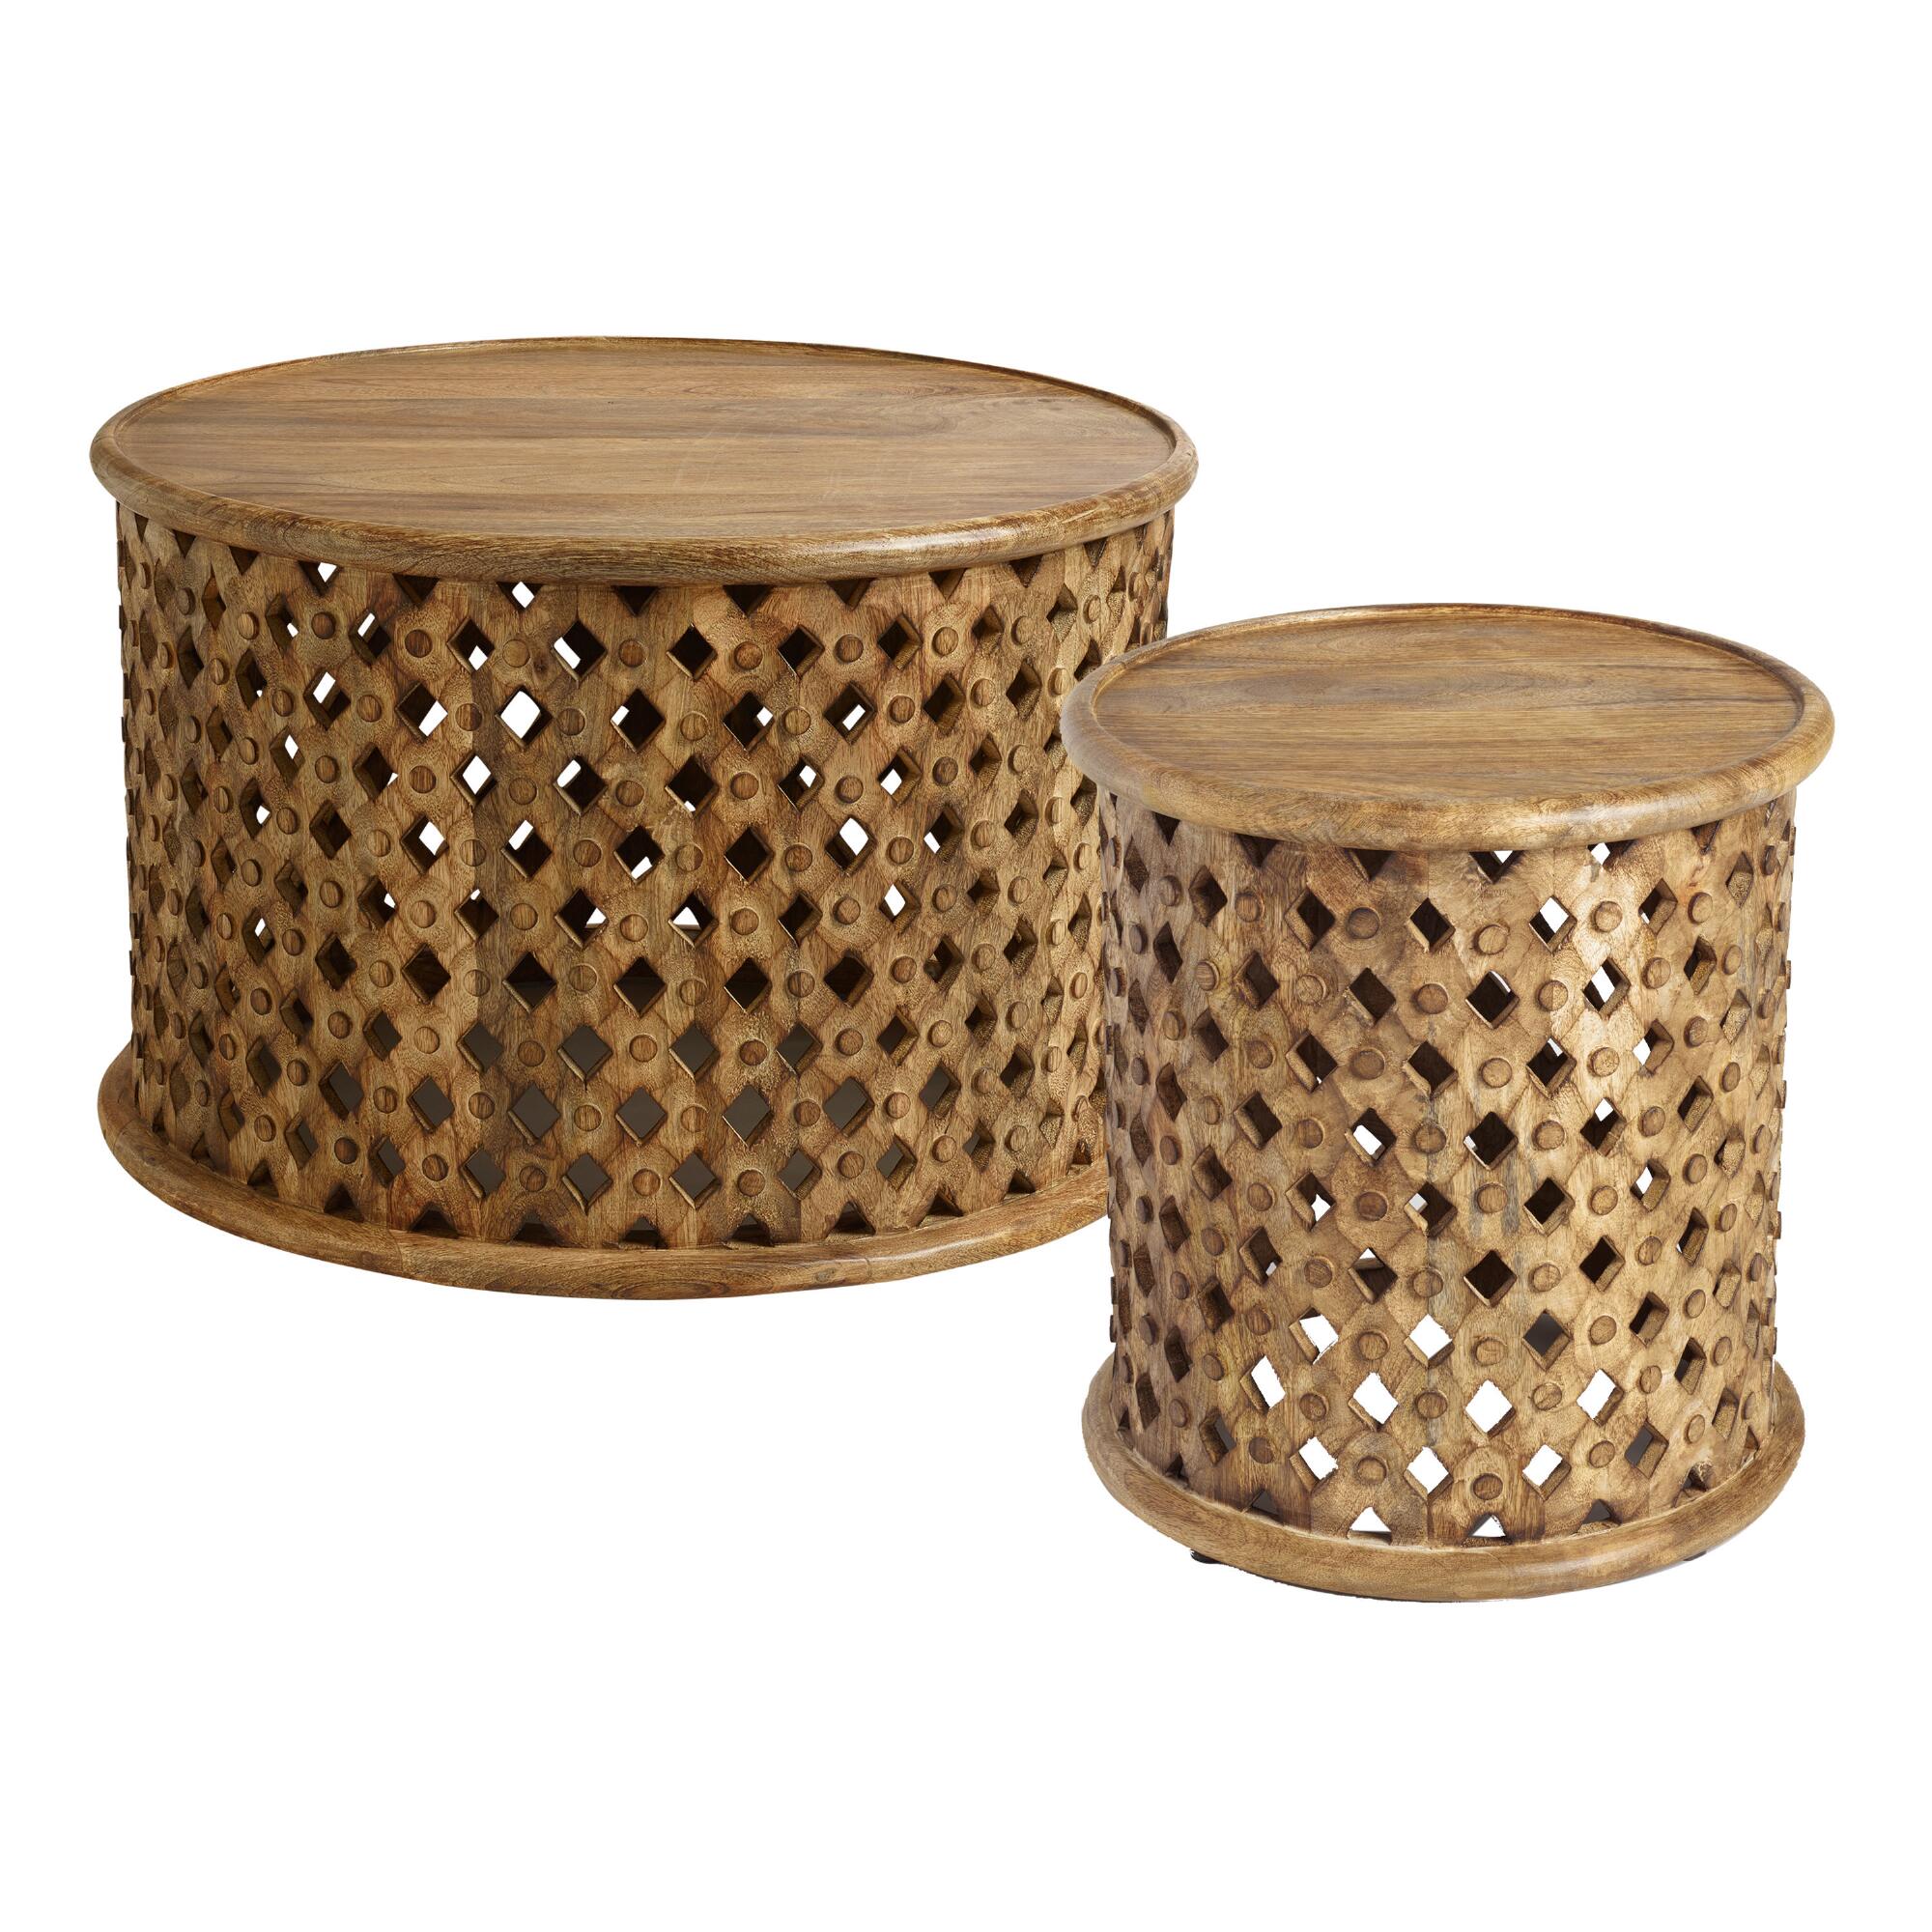 Lattice Carved Wood Furniture Collection by World Market